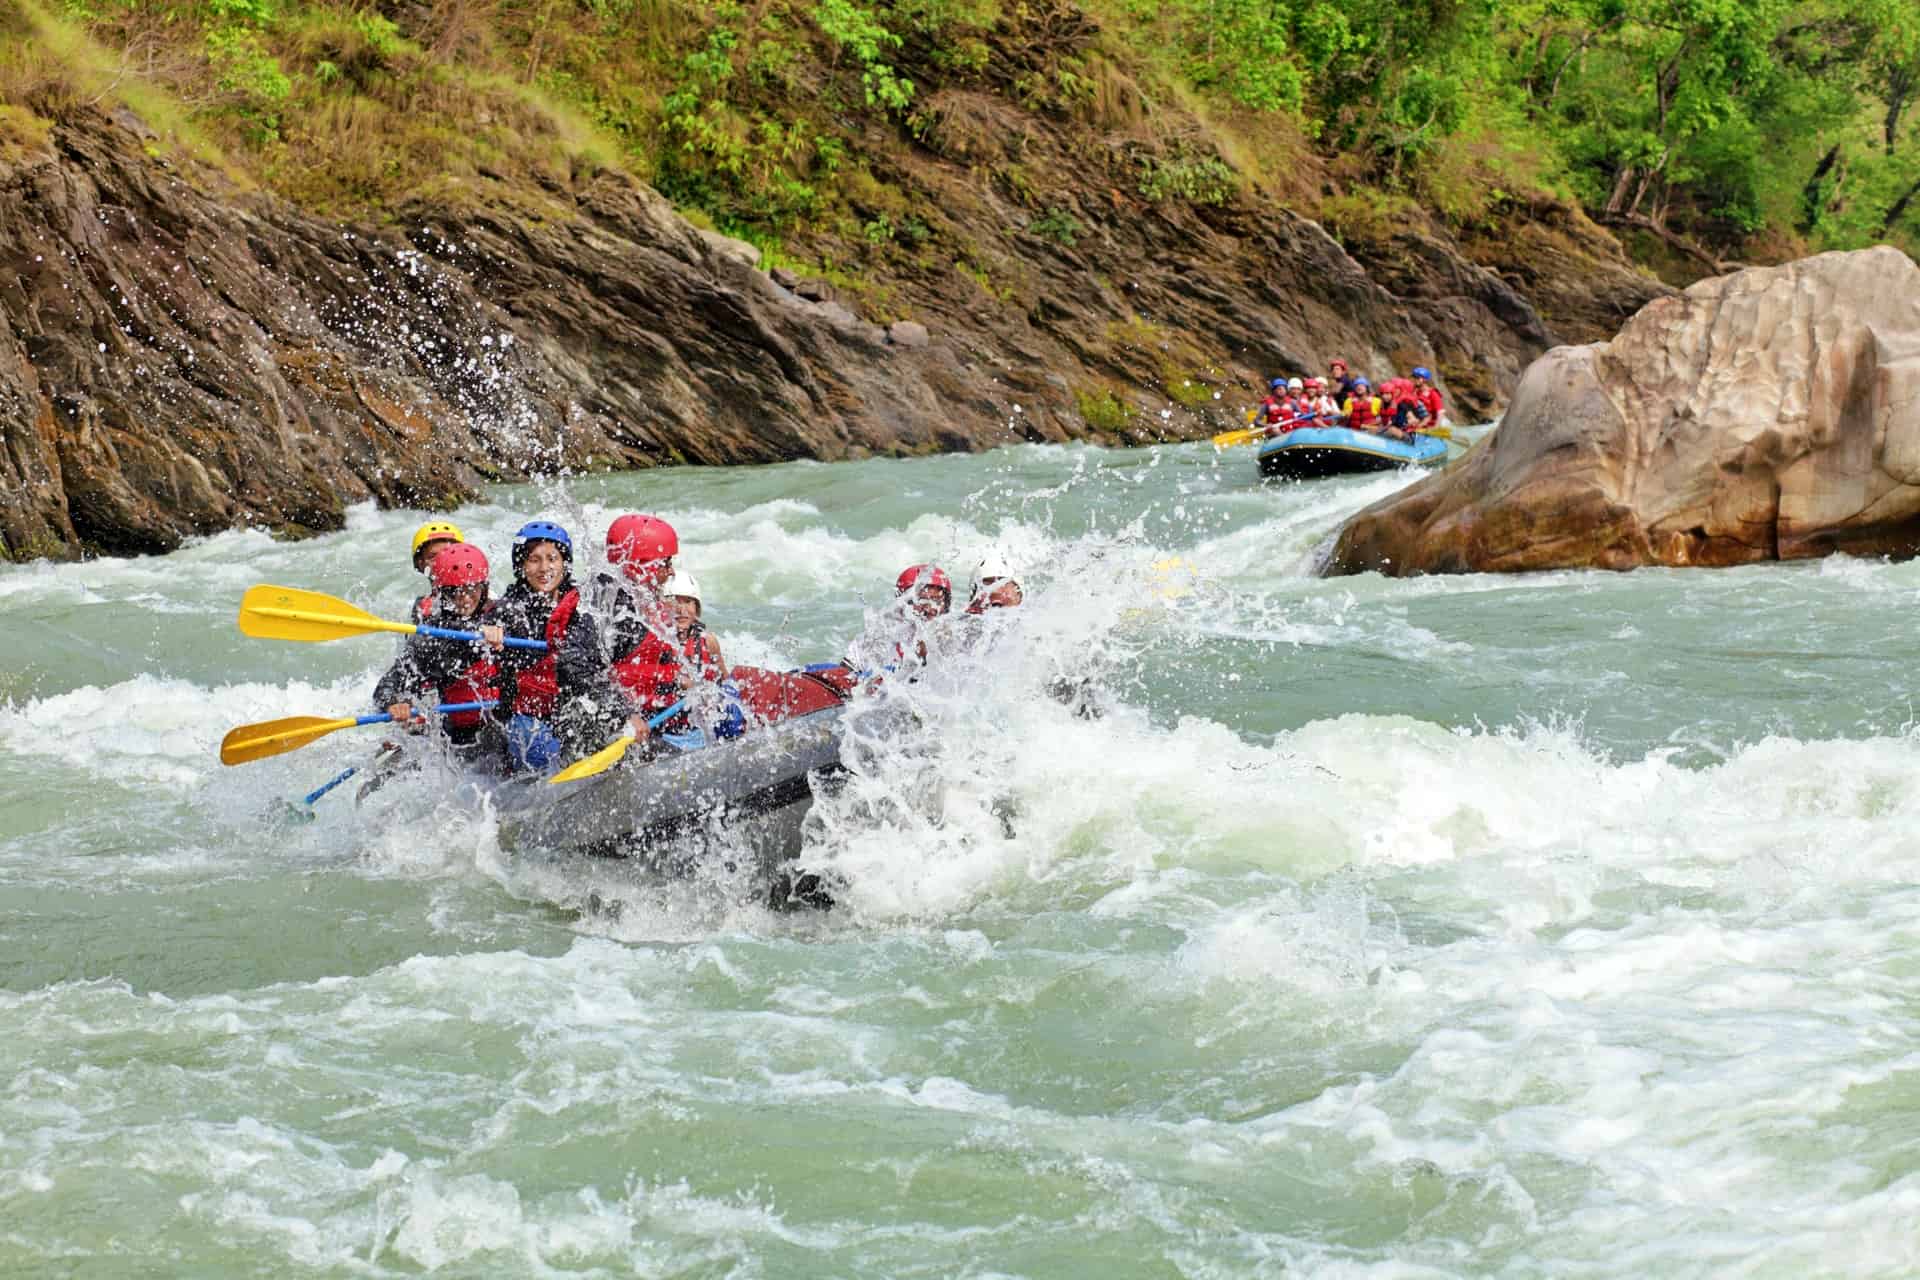 The 6 most important safety rules when rafting